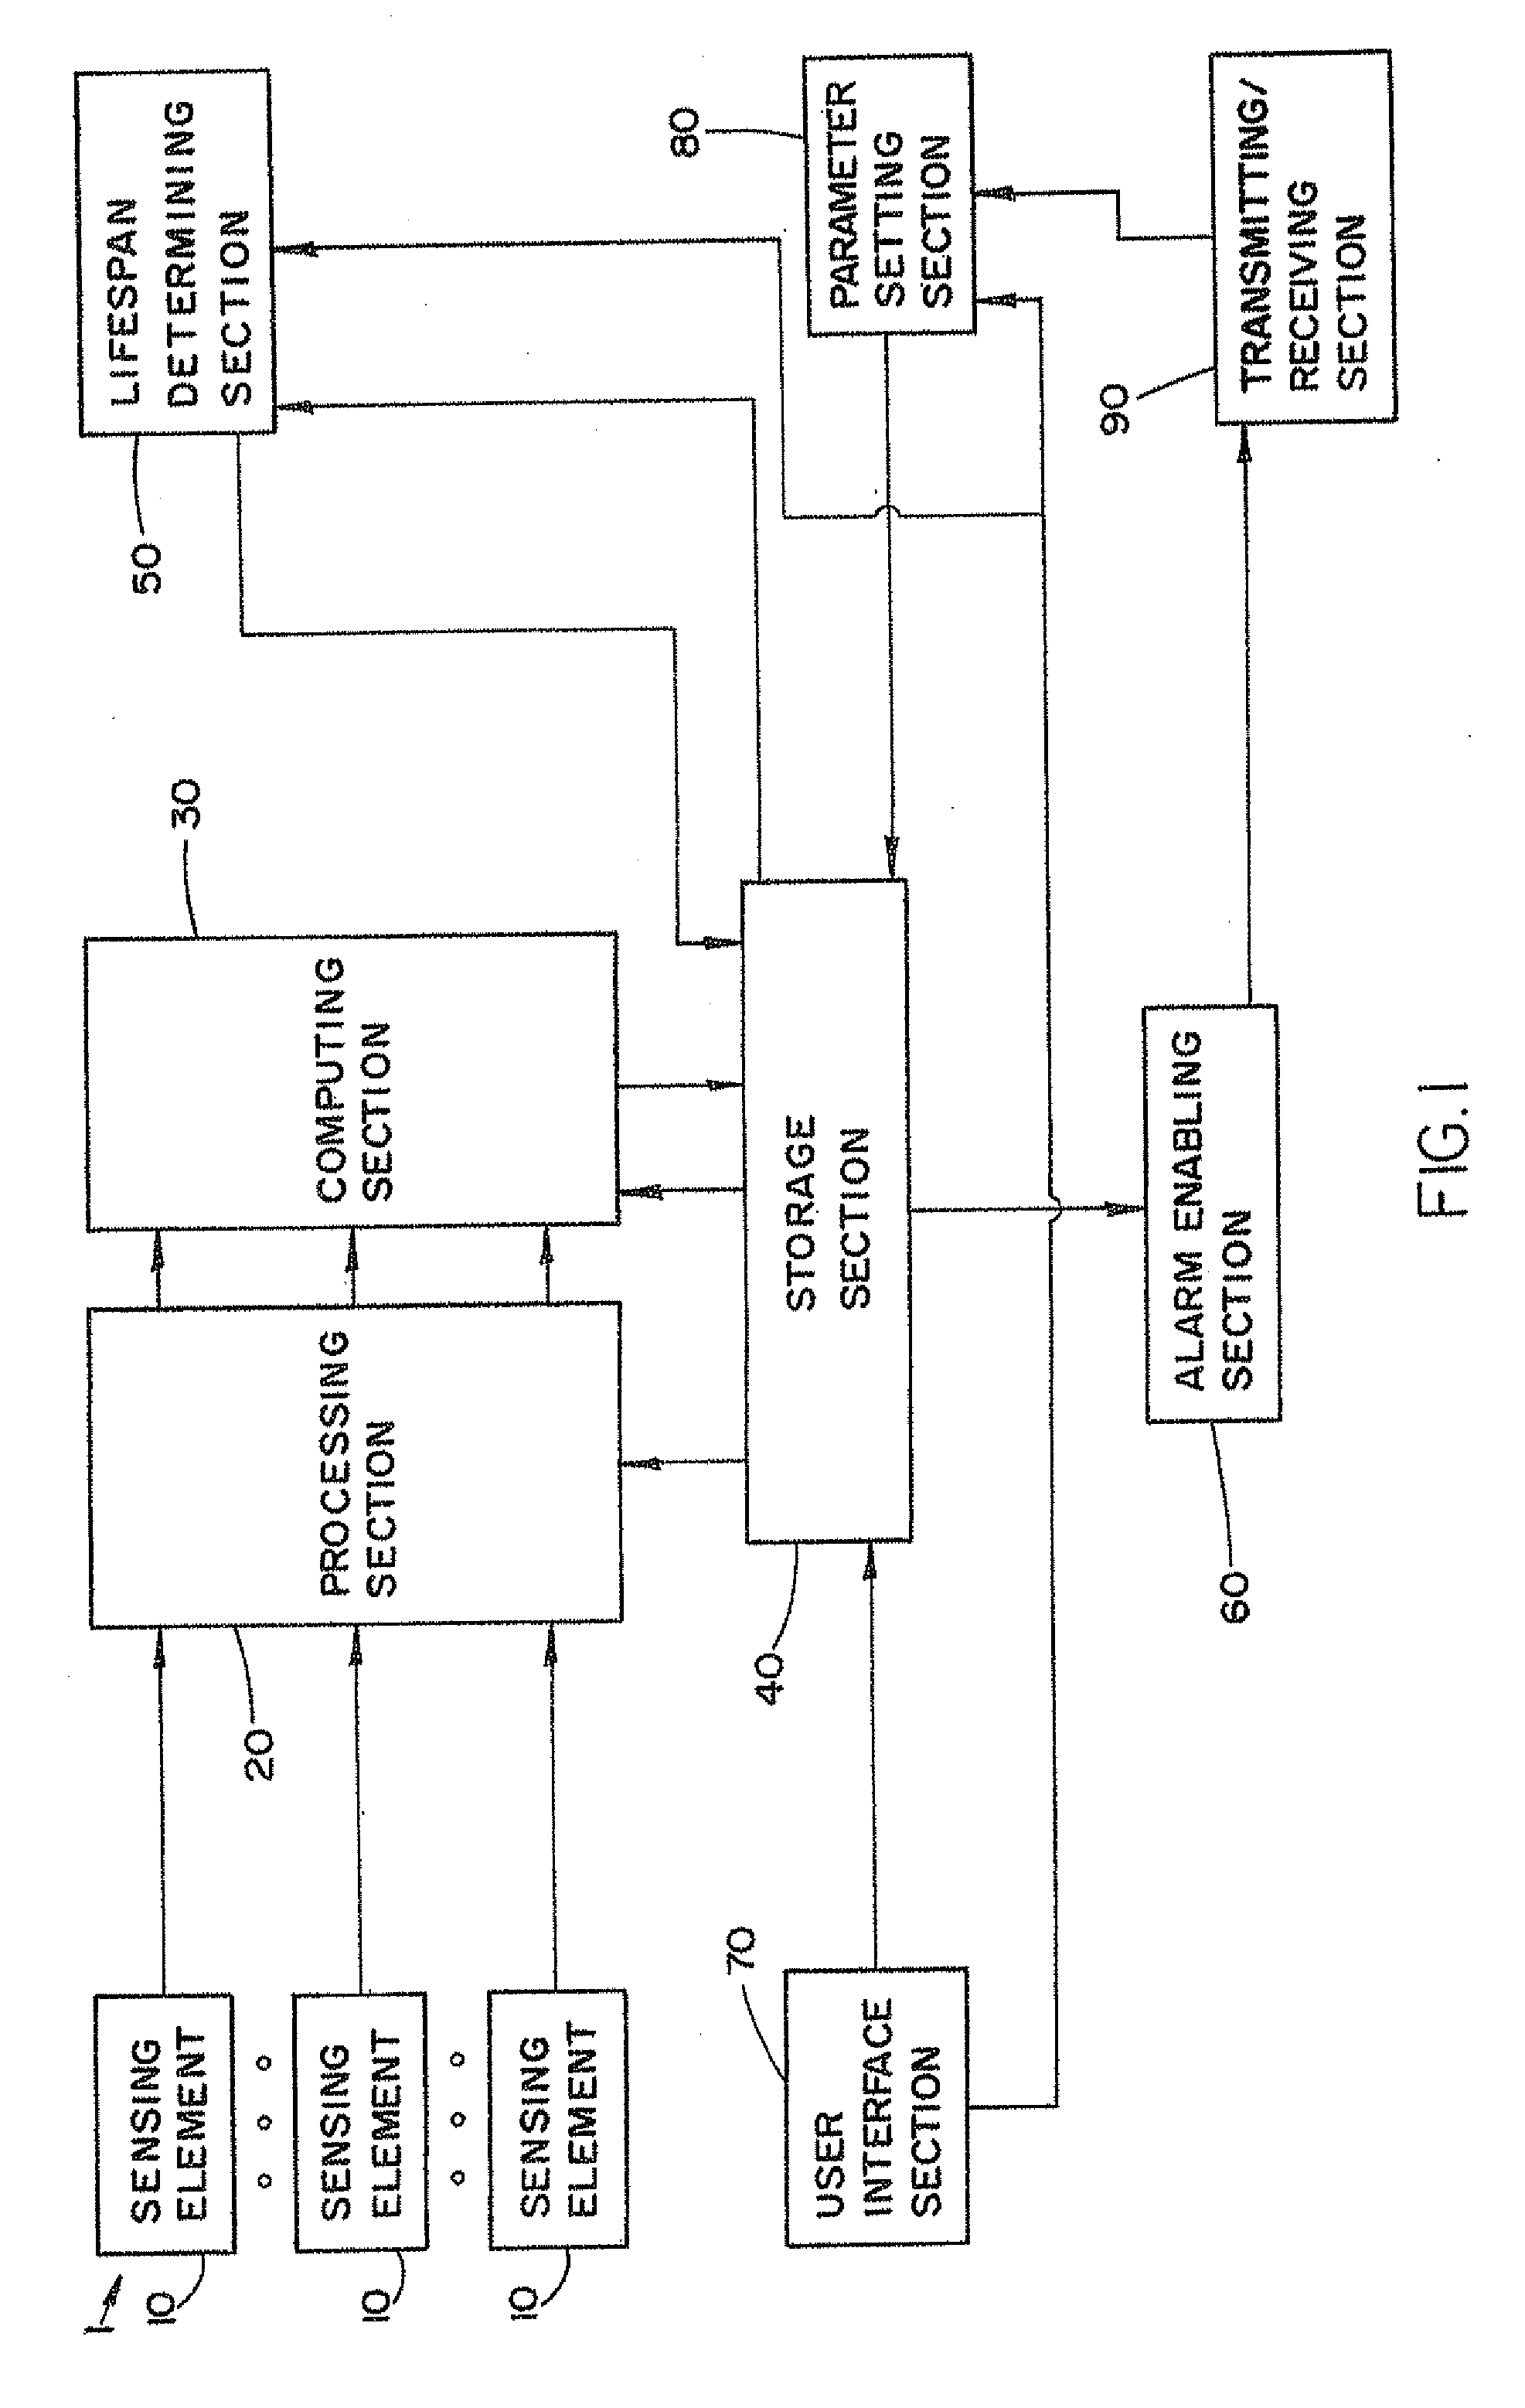 Integrated multi-spectrum intrusion threat detection device and method for operation